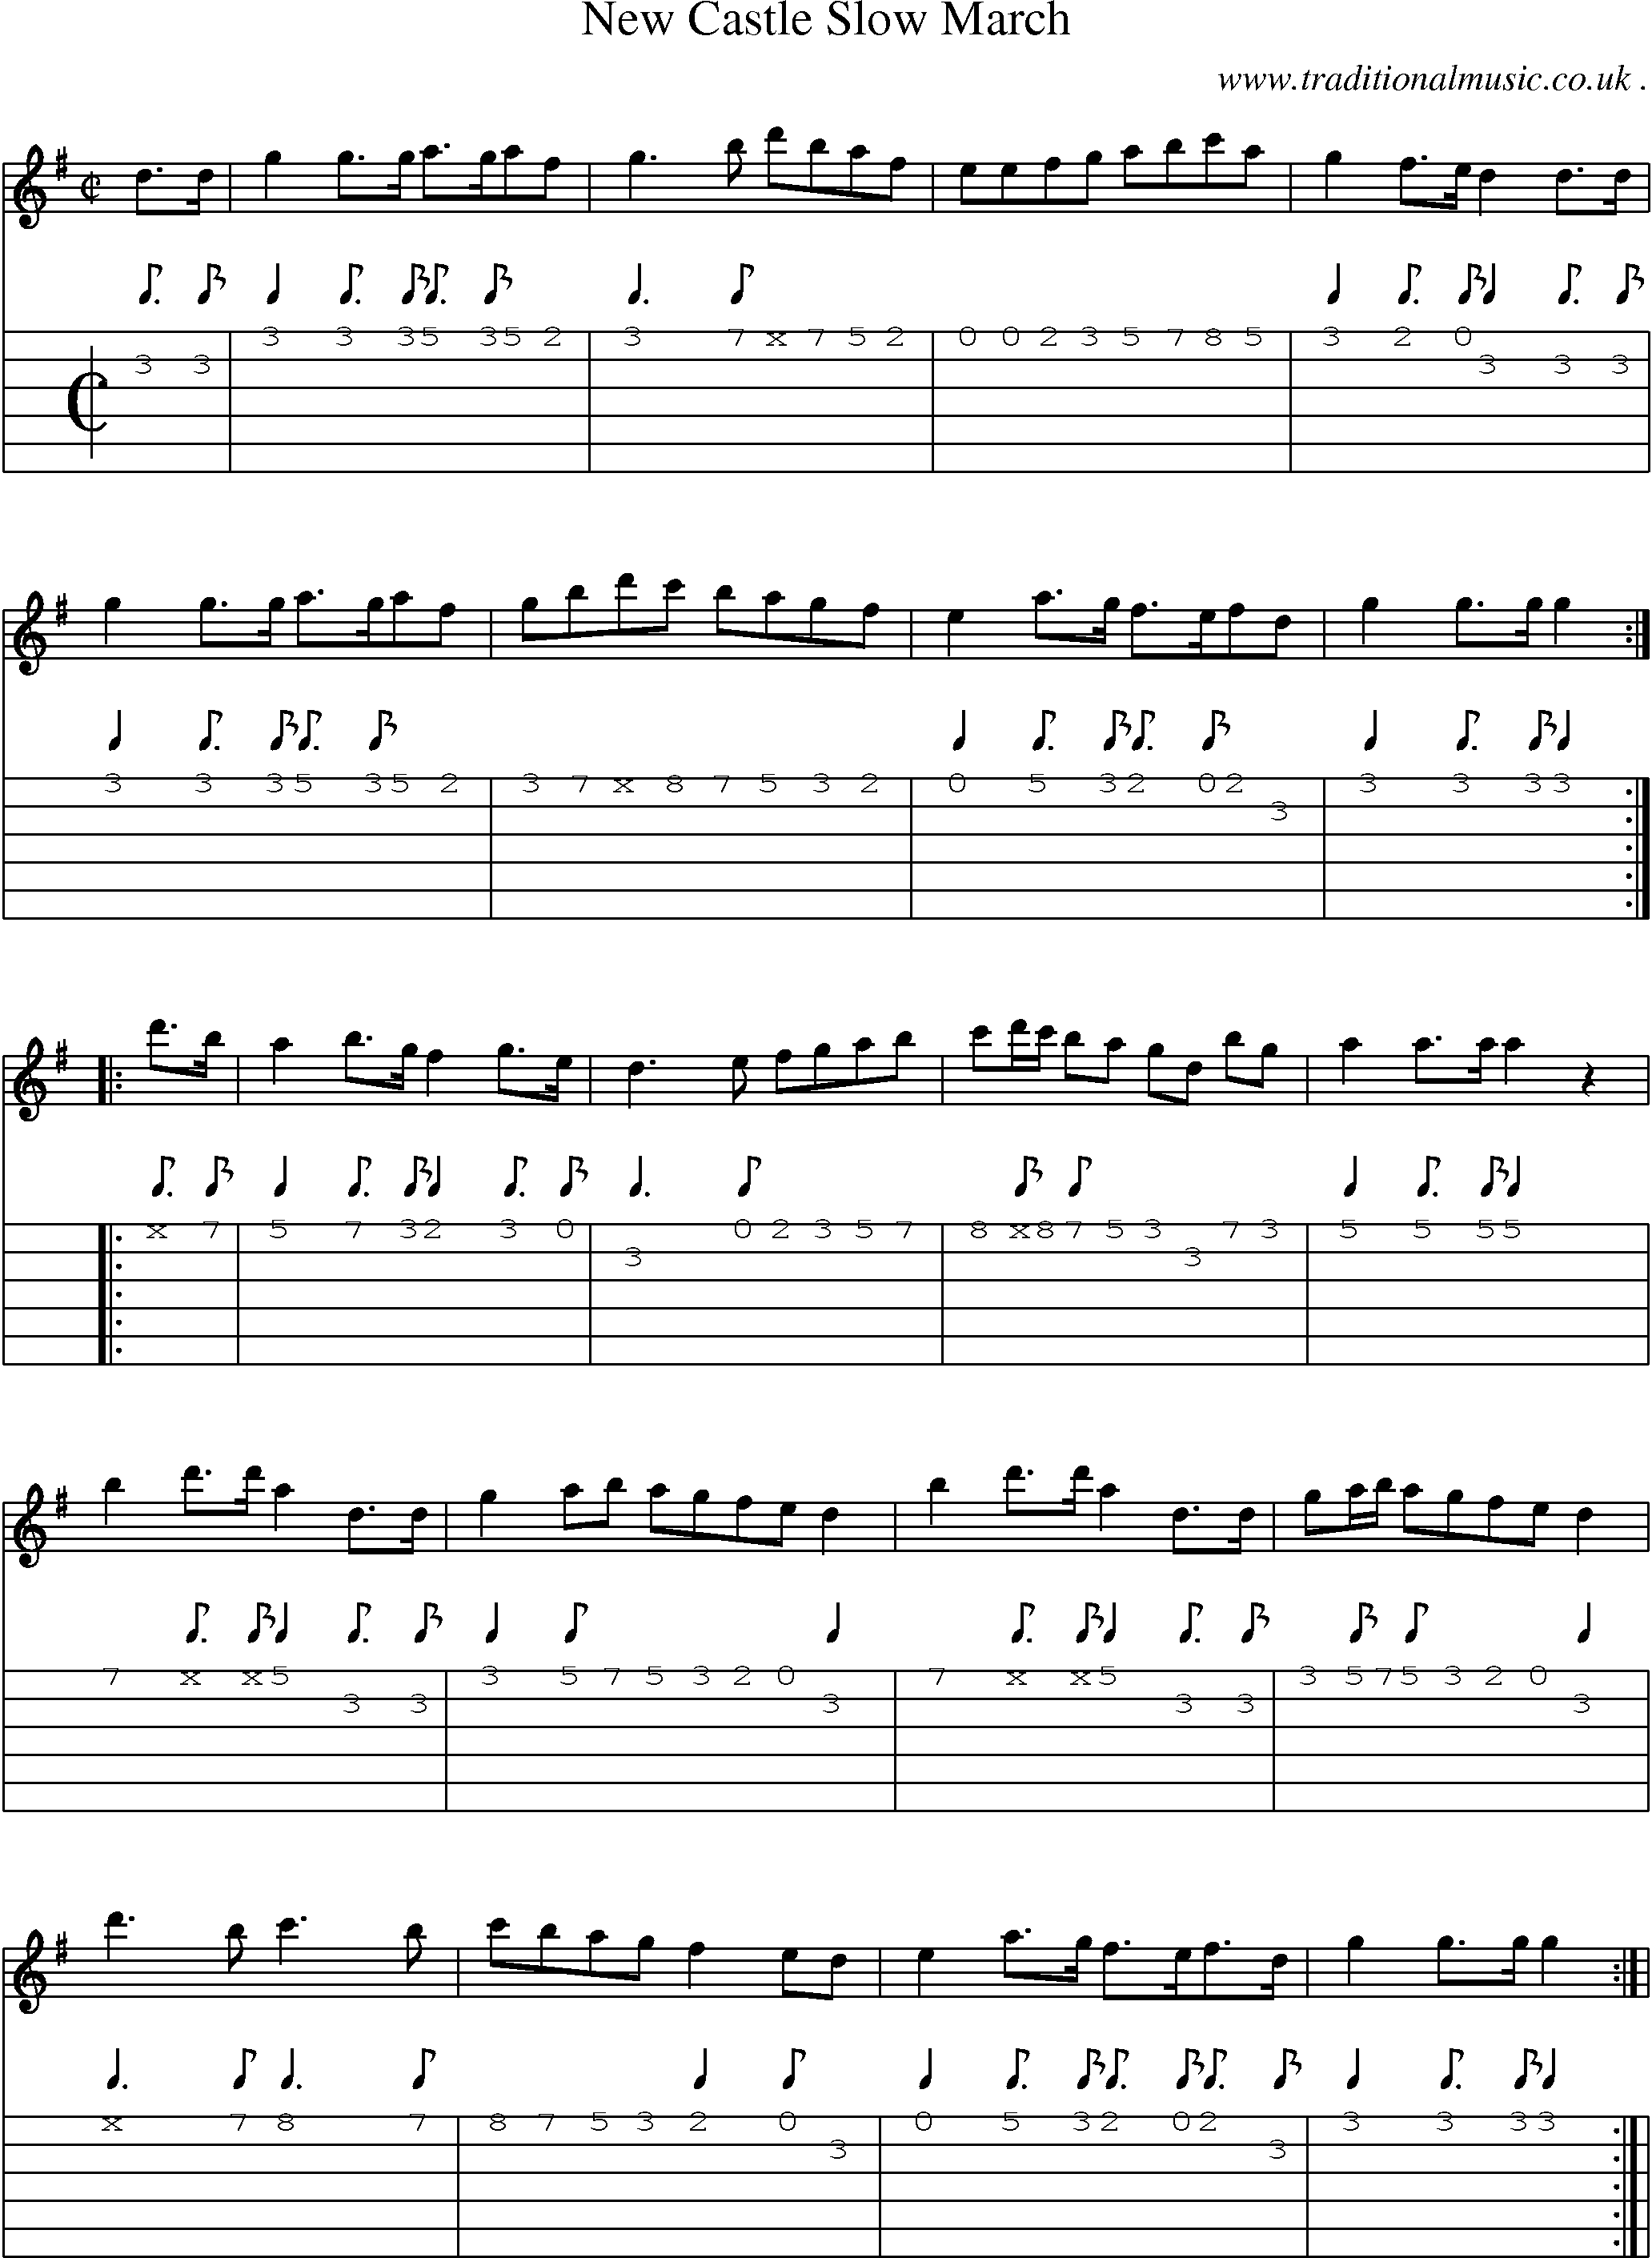 Sheet-Music and Guitar Tabs for New Castle Slow March